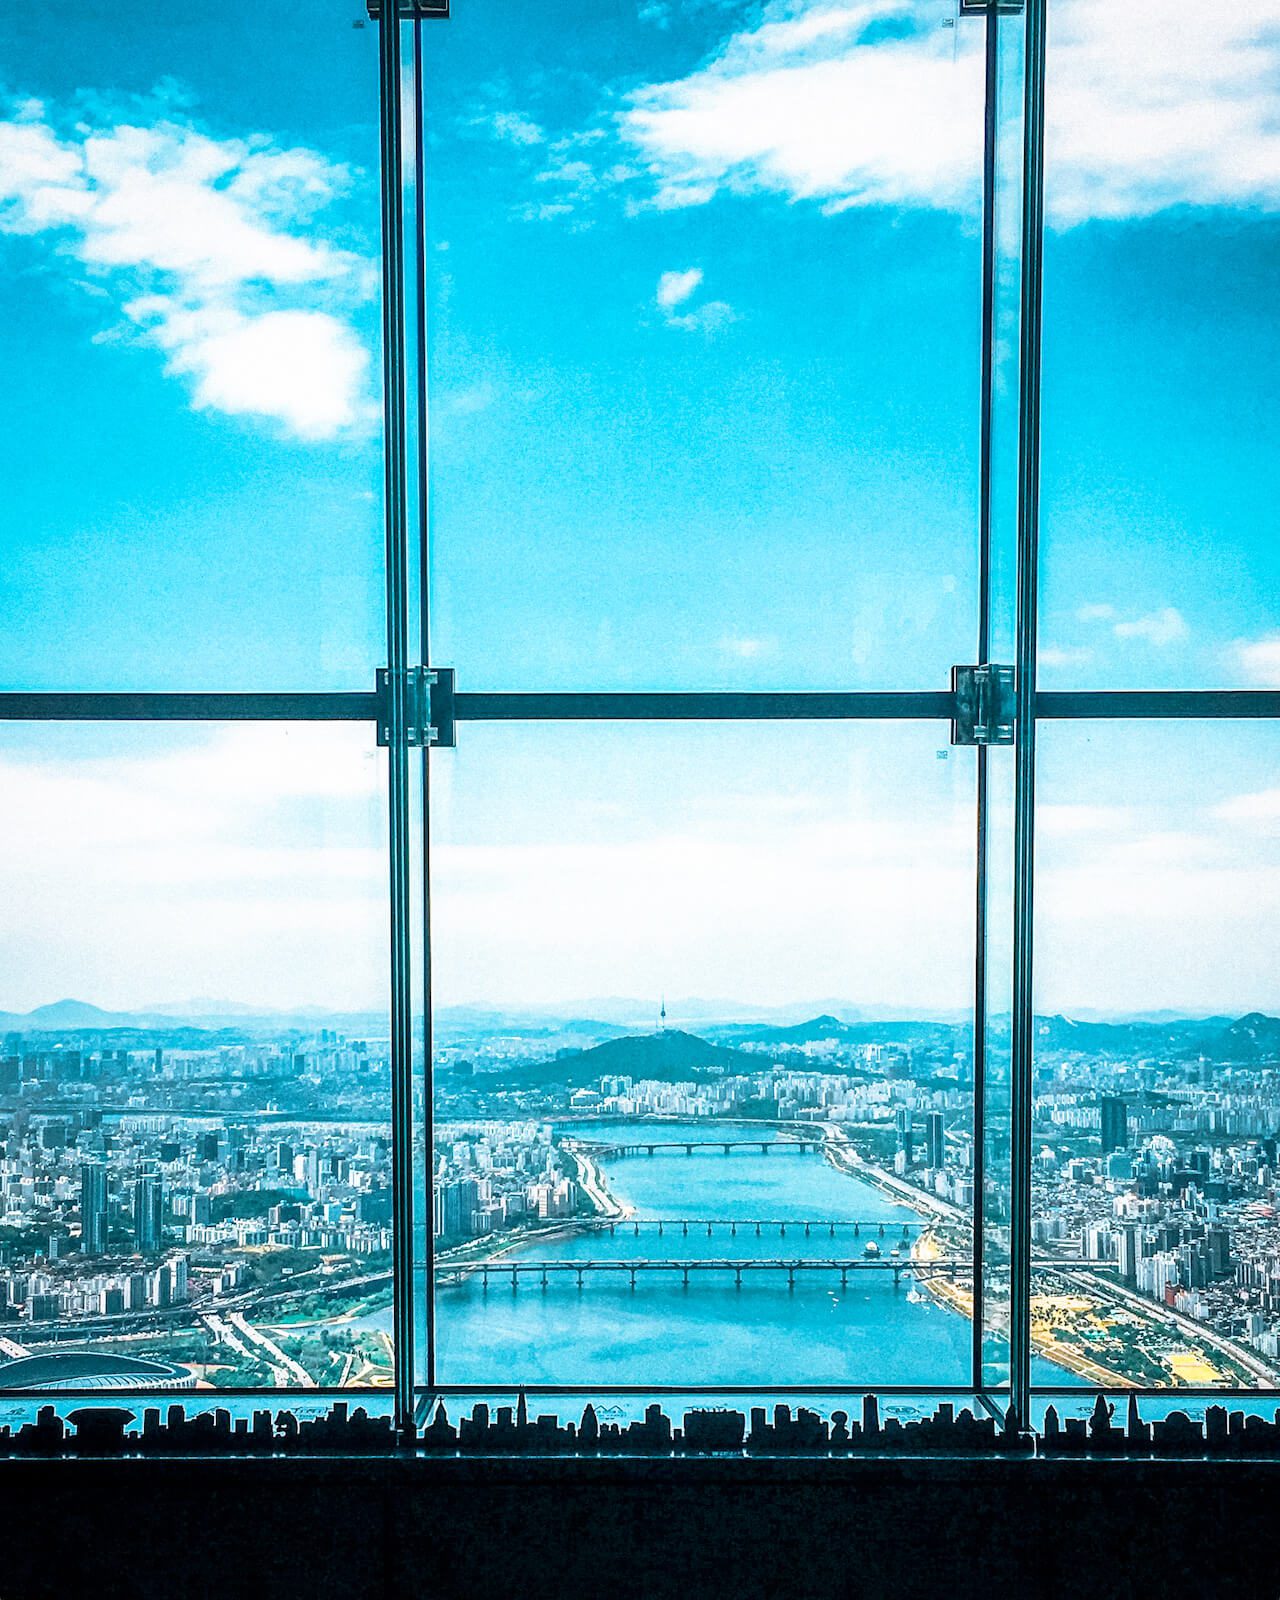 indoor attractions in seoul | seoul sky observatory lotte world tower